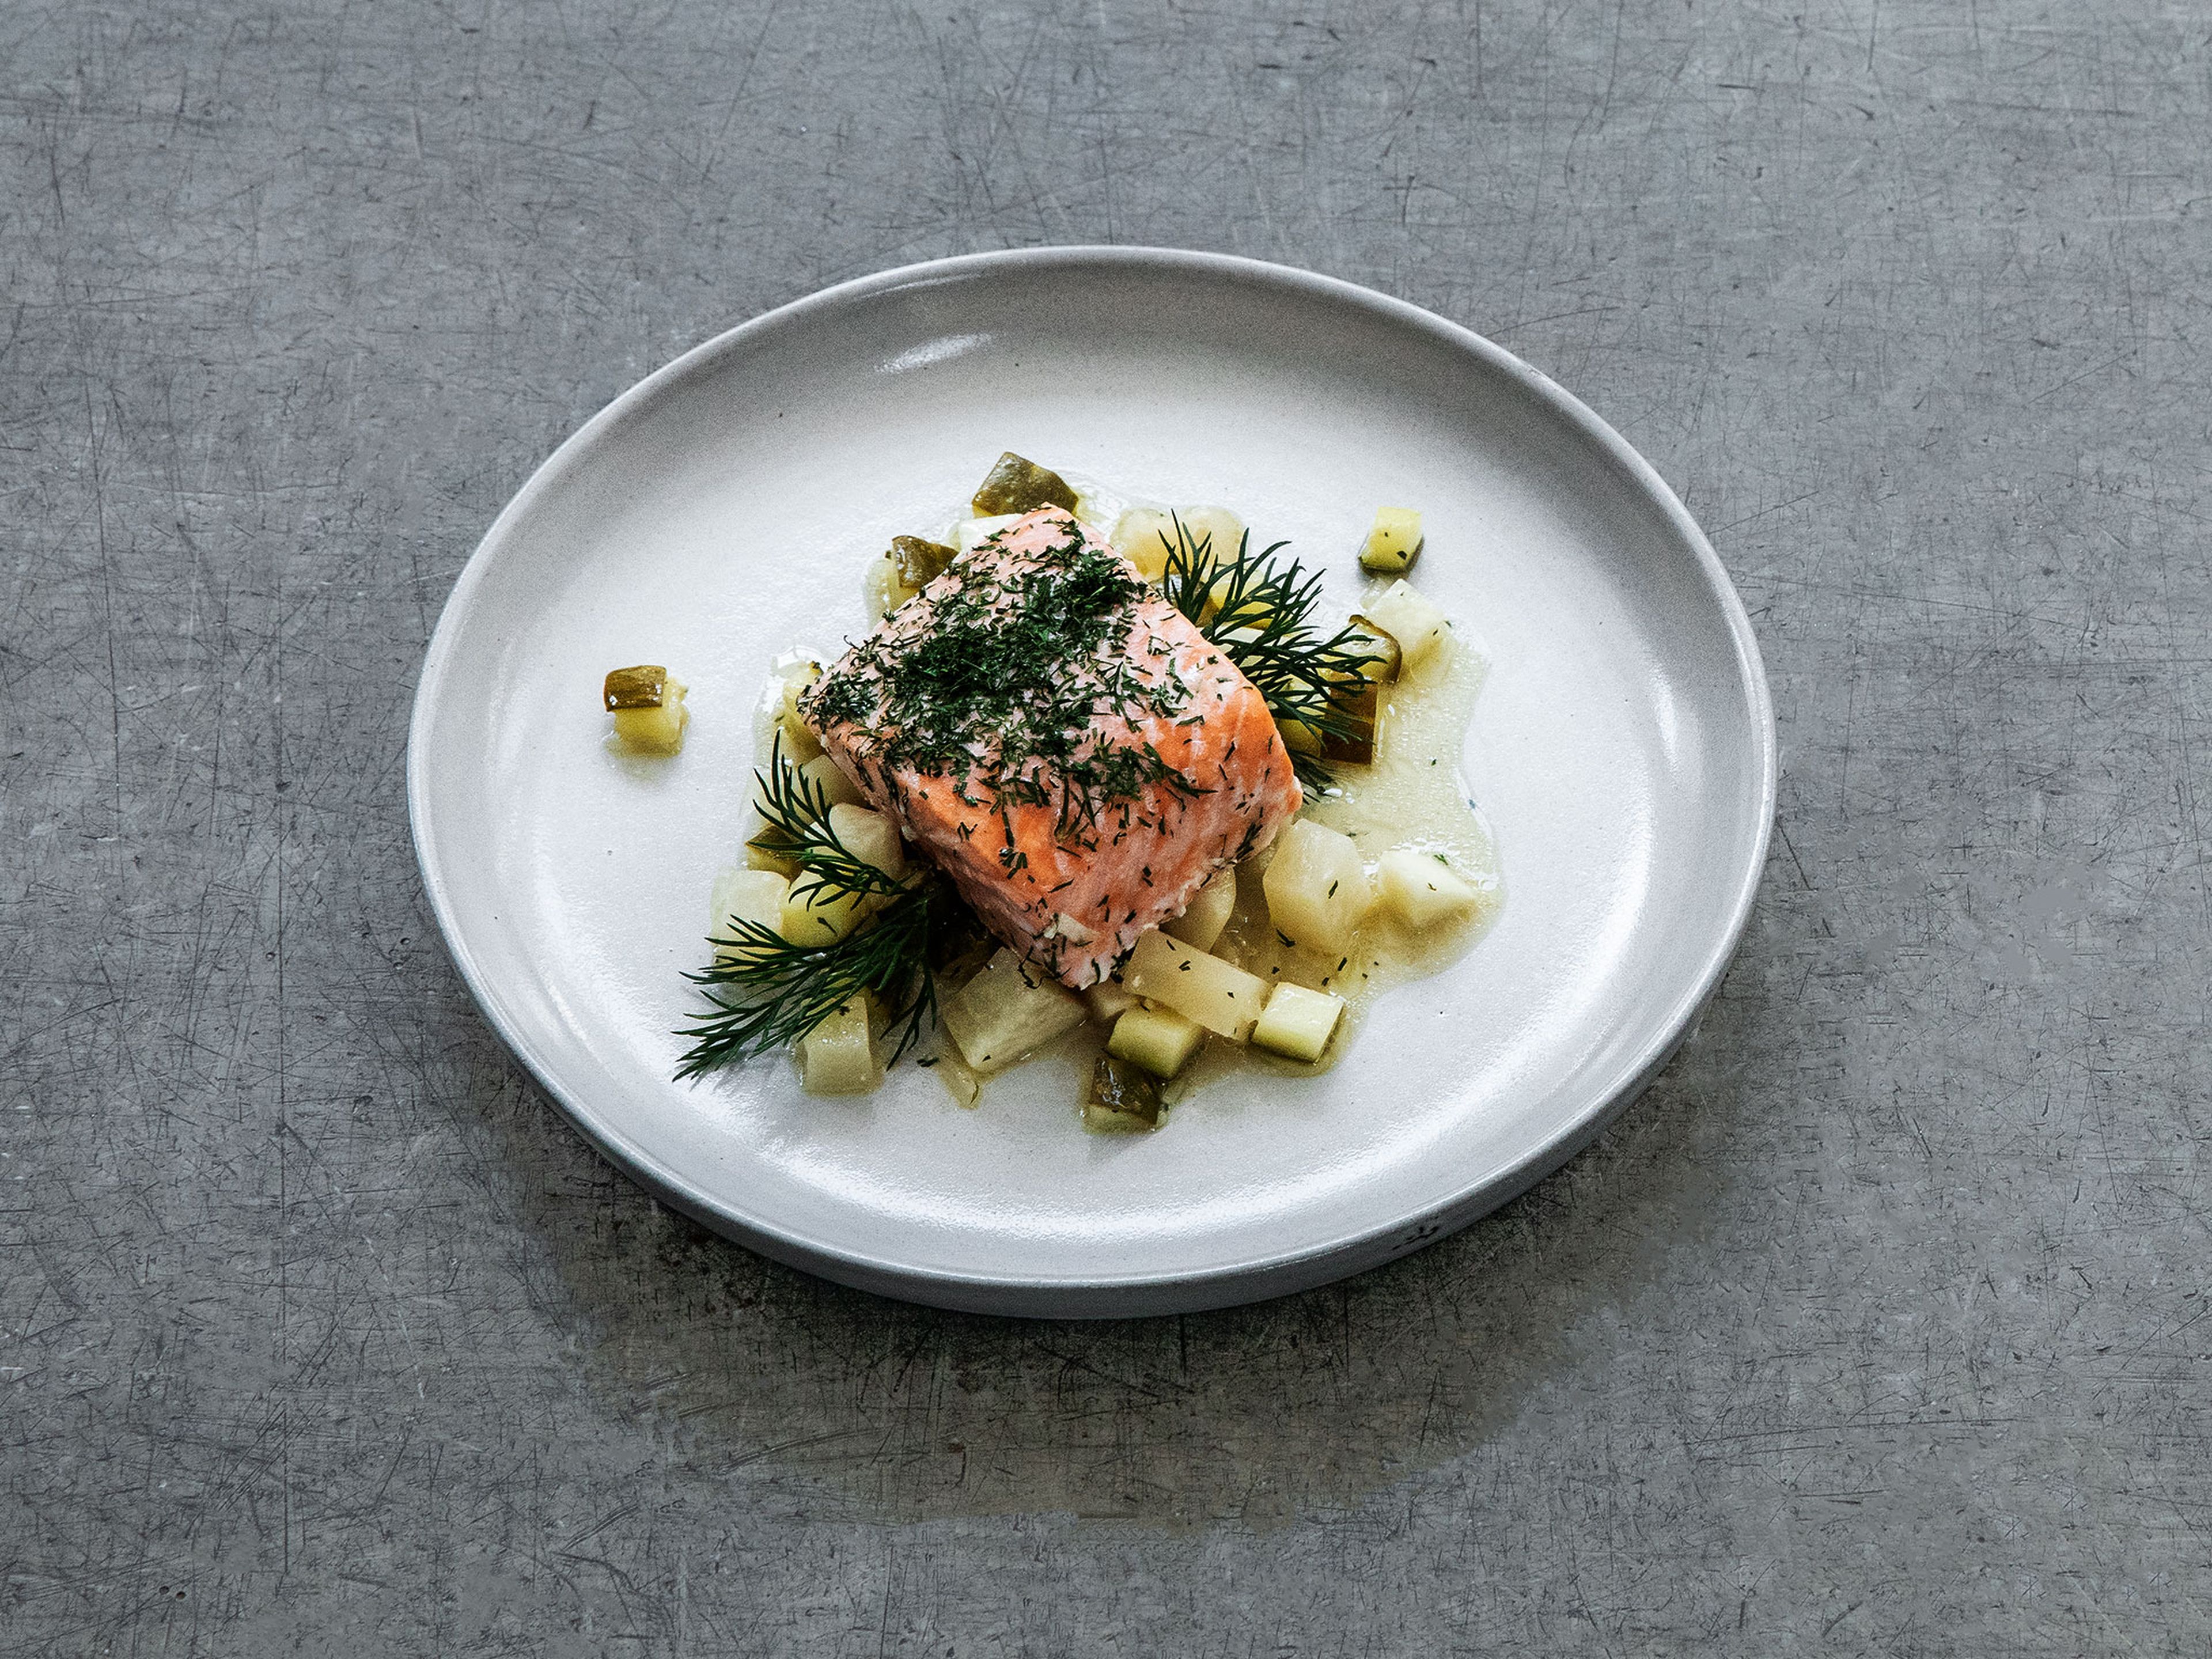 Oven-baked salmon with kohlrabi and cucumber